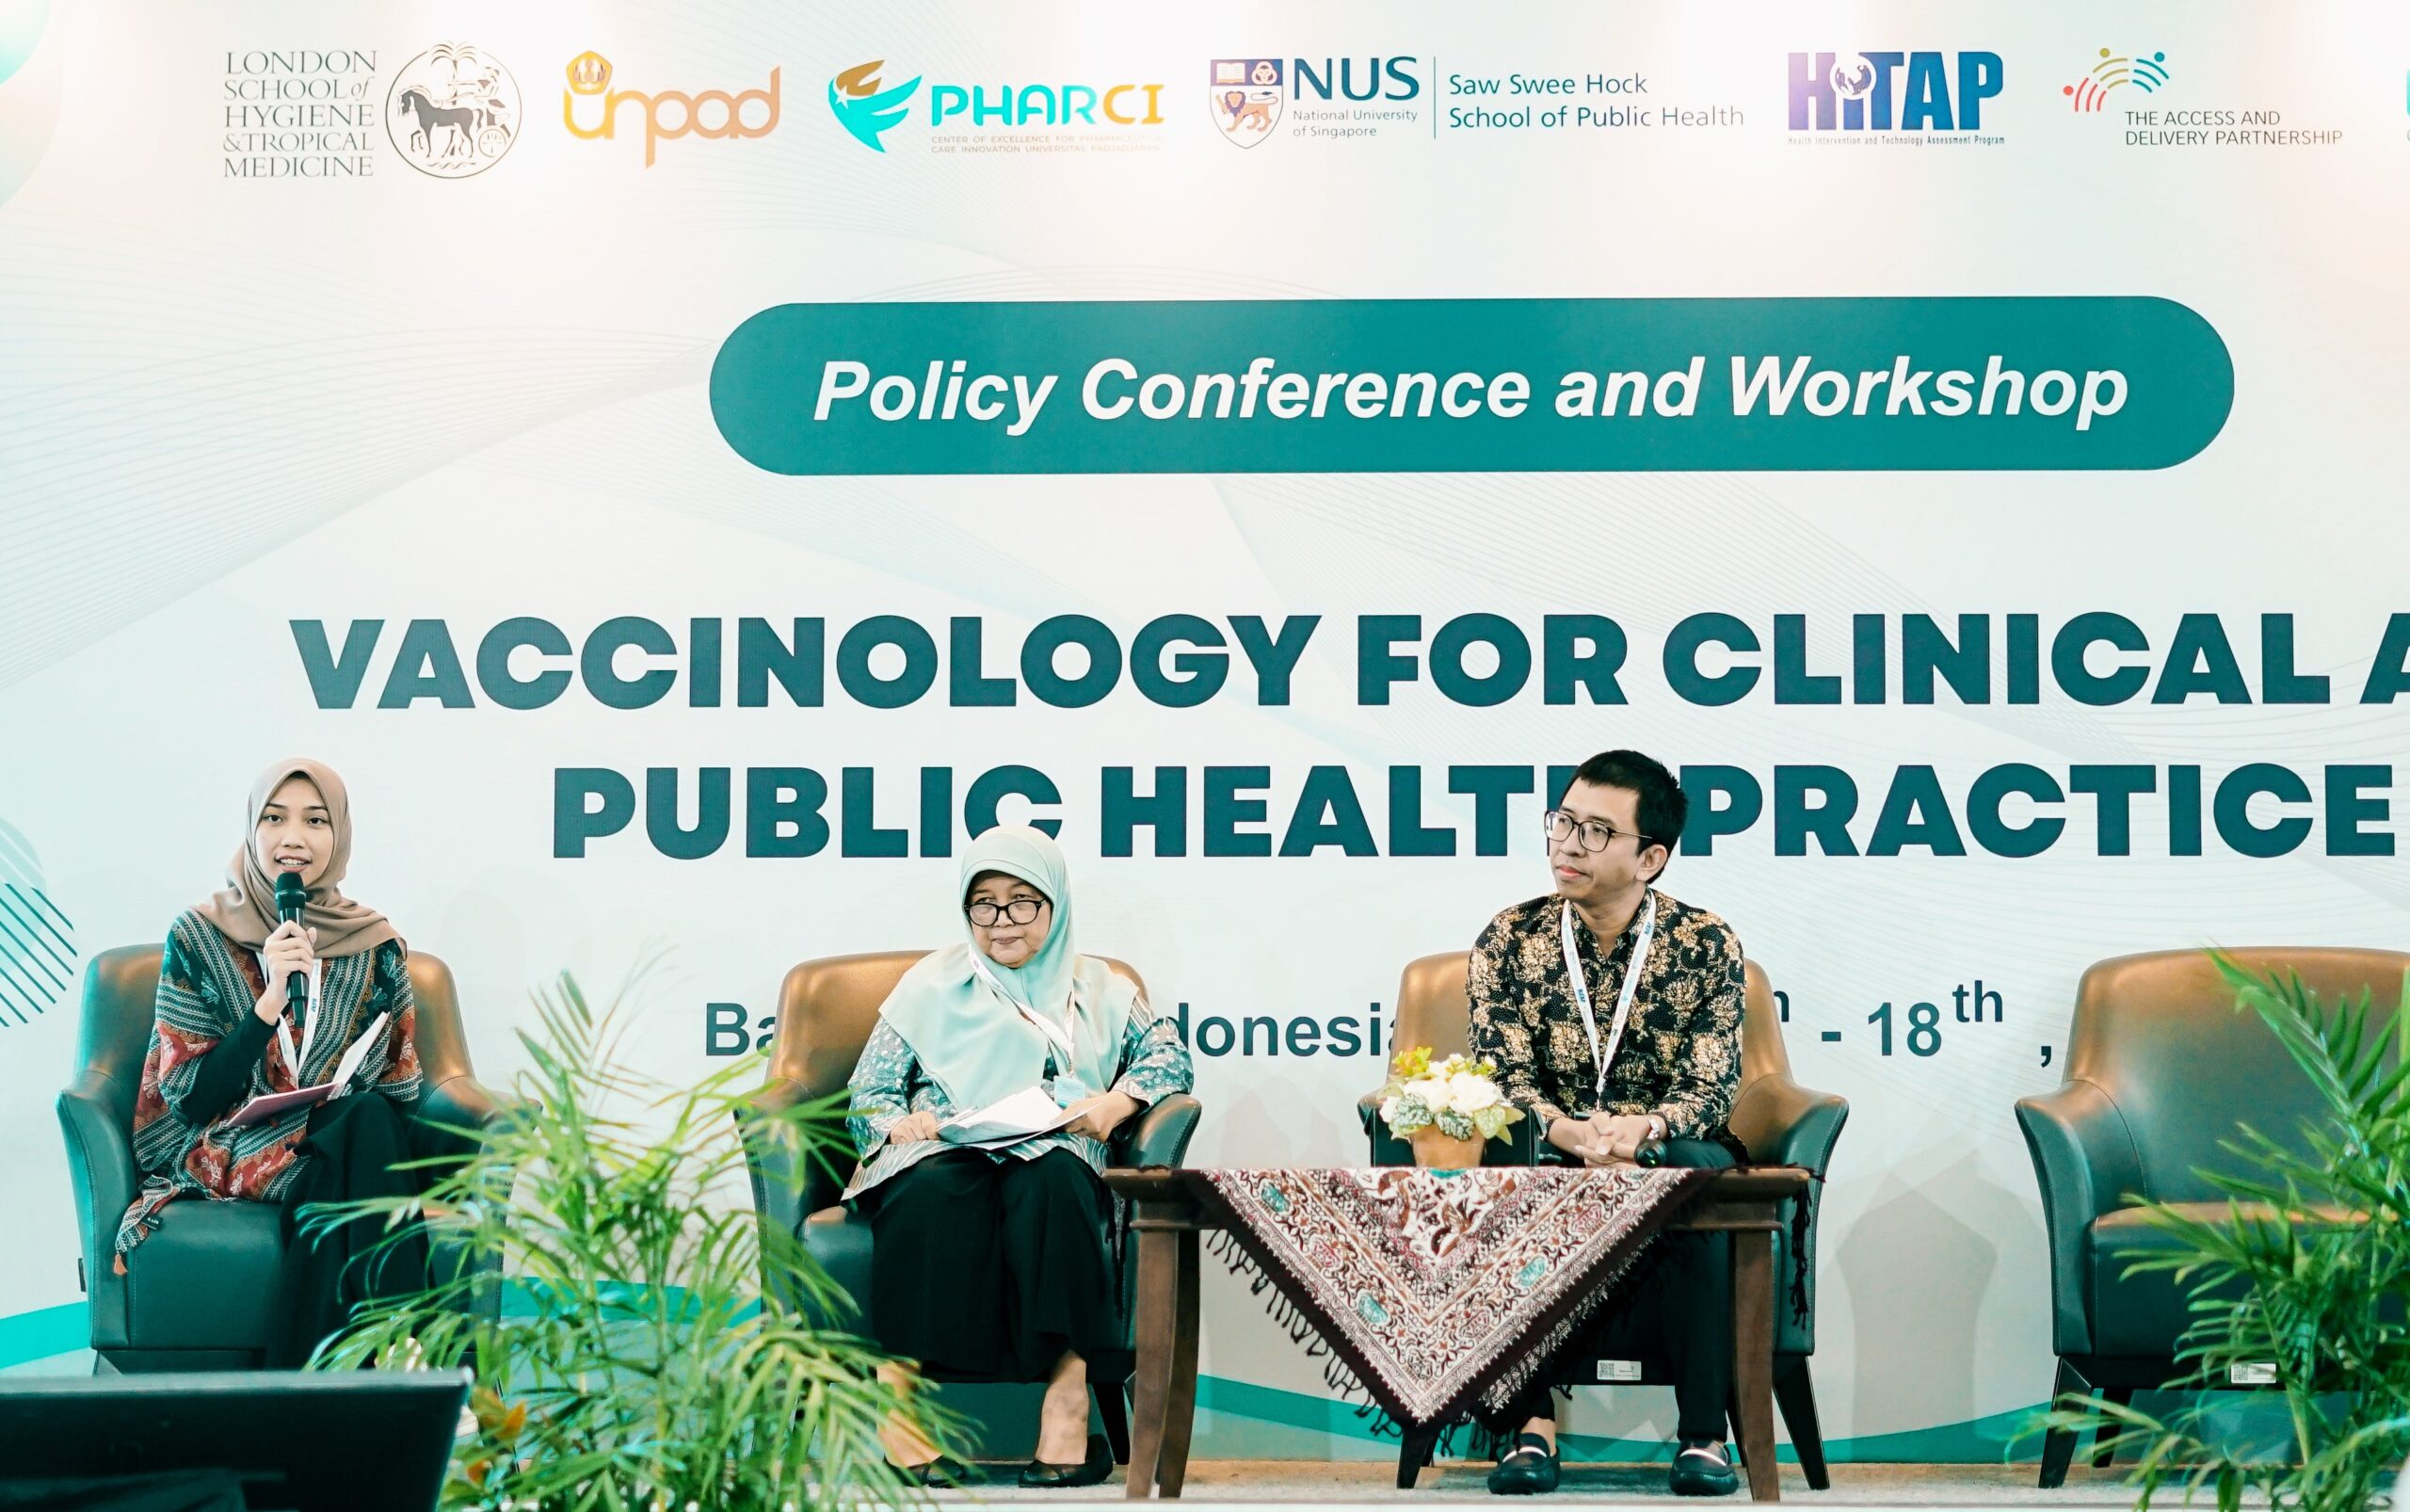 Khansa Chavarina, HITAP, Prof Mardiati Nadjib, Indonesia HTA committee, and Dr. Auliya Abdurrohim Suwantika, UNPAD, participate in a session on setting priorities for new vaccines, during the Policy Conference and Workshop on Vaccinology for Clinical and Public Health Practice in Bandung, Indonesia. Photo: HITAP.